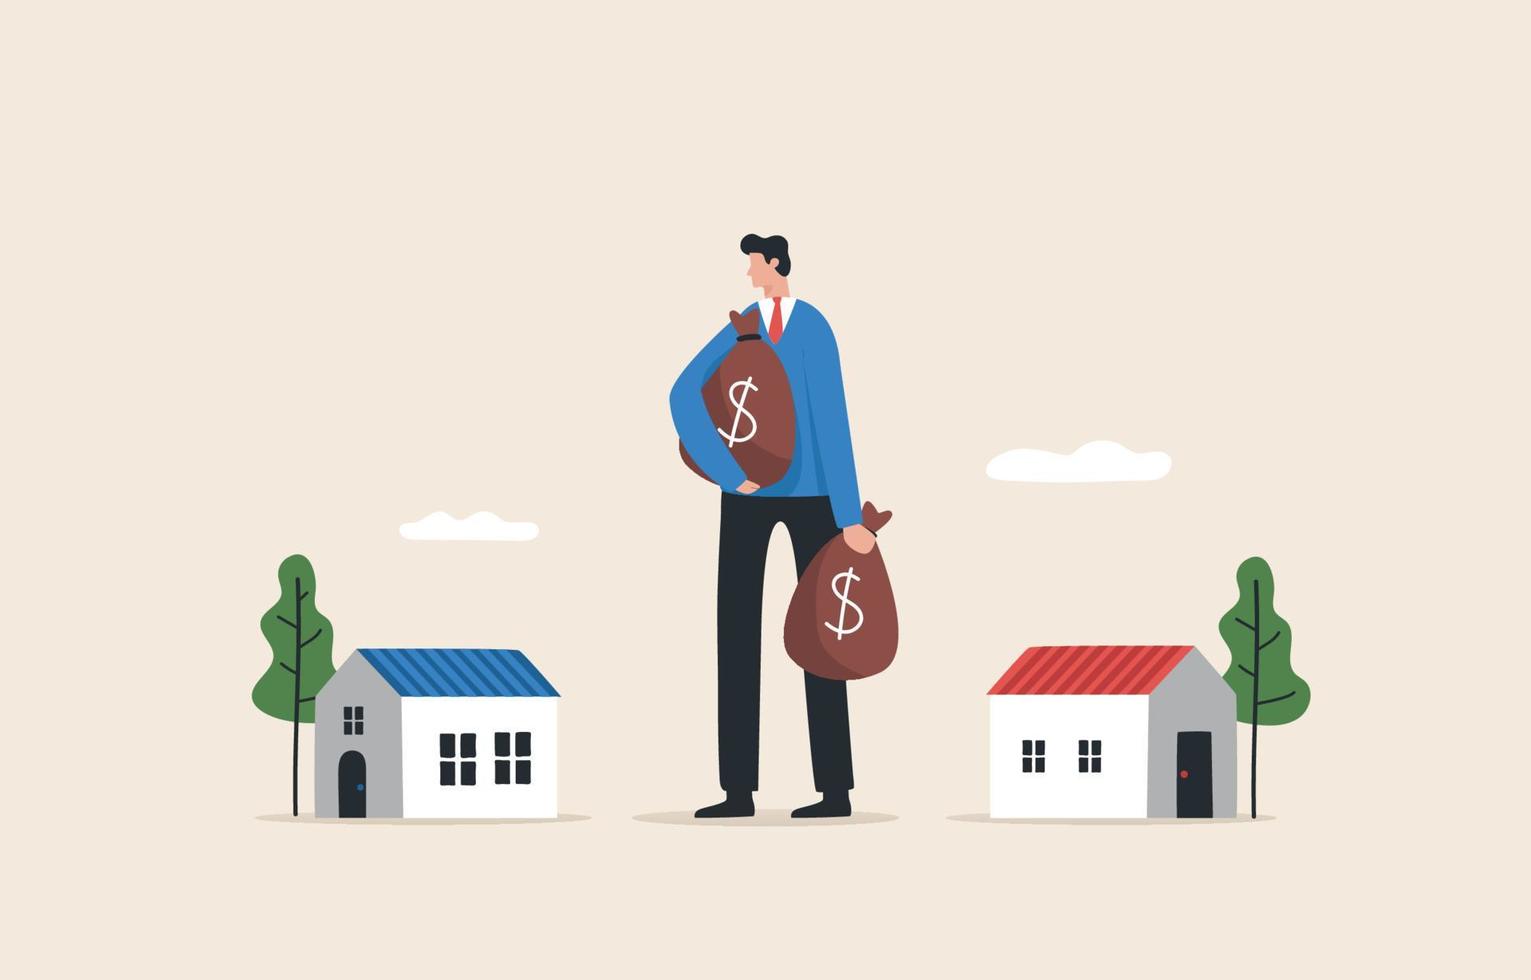 Choosing to invest in real estate and housing Interest rates on a loan or home rental. Young man or investor looking to buy a small home. vector